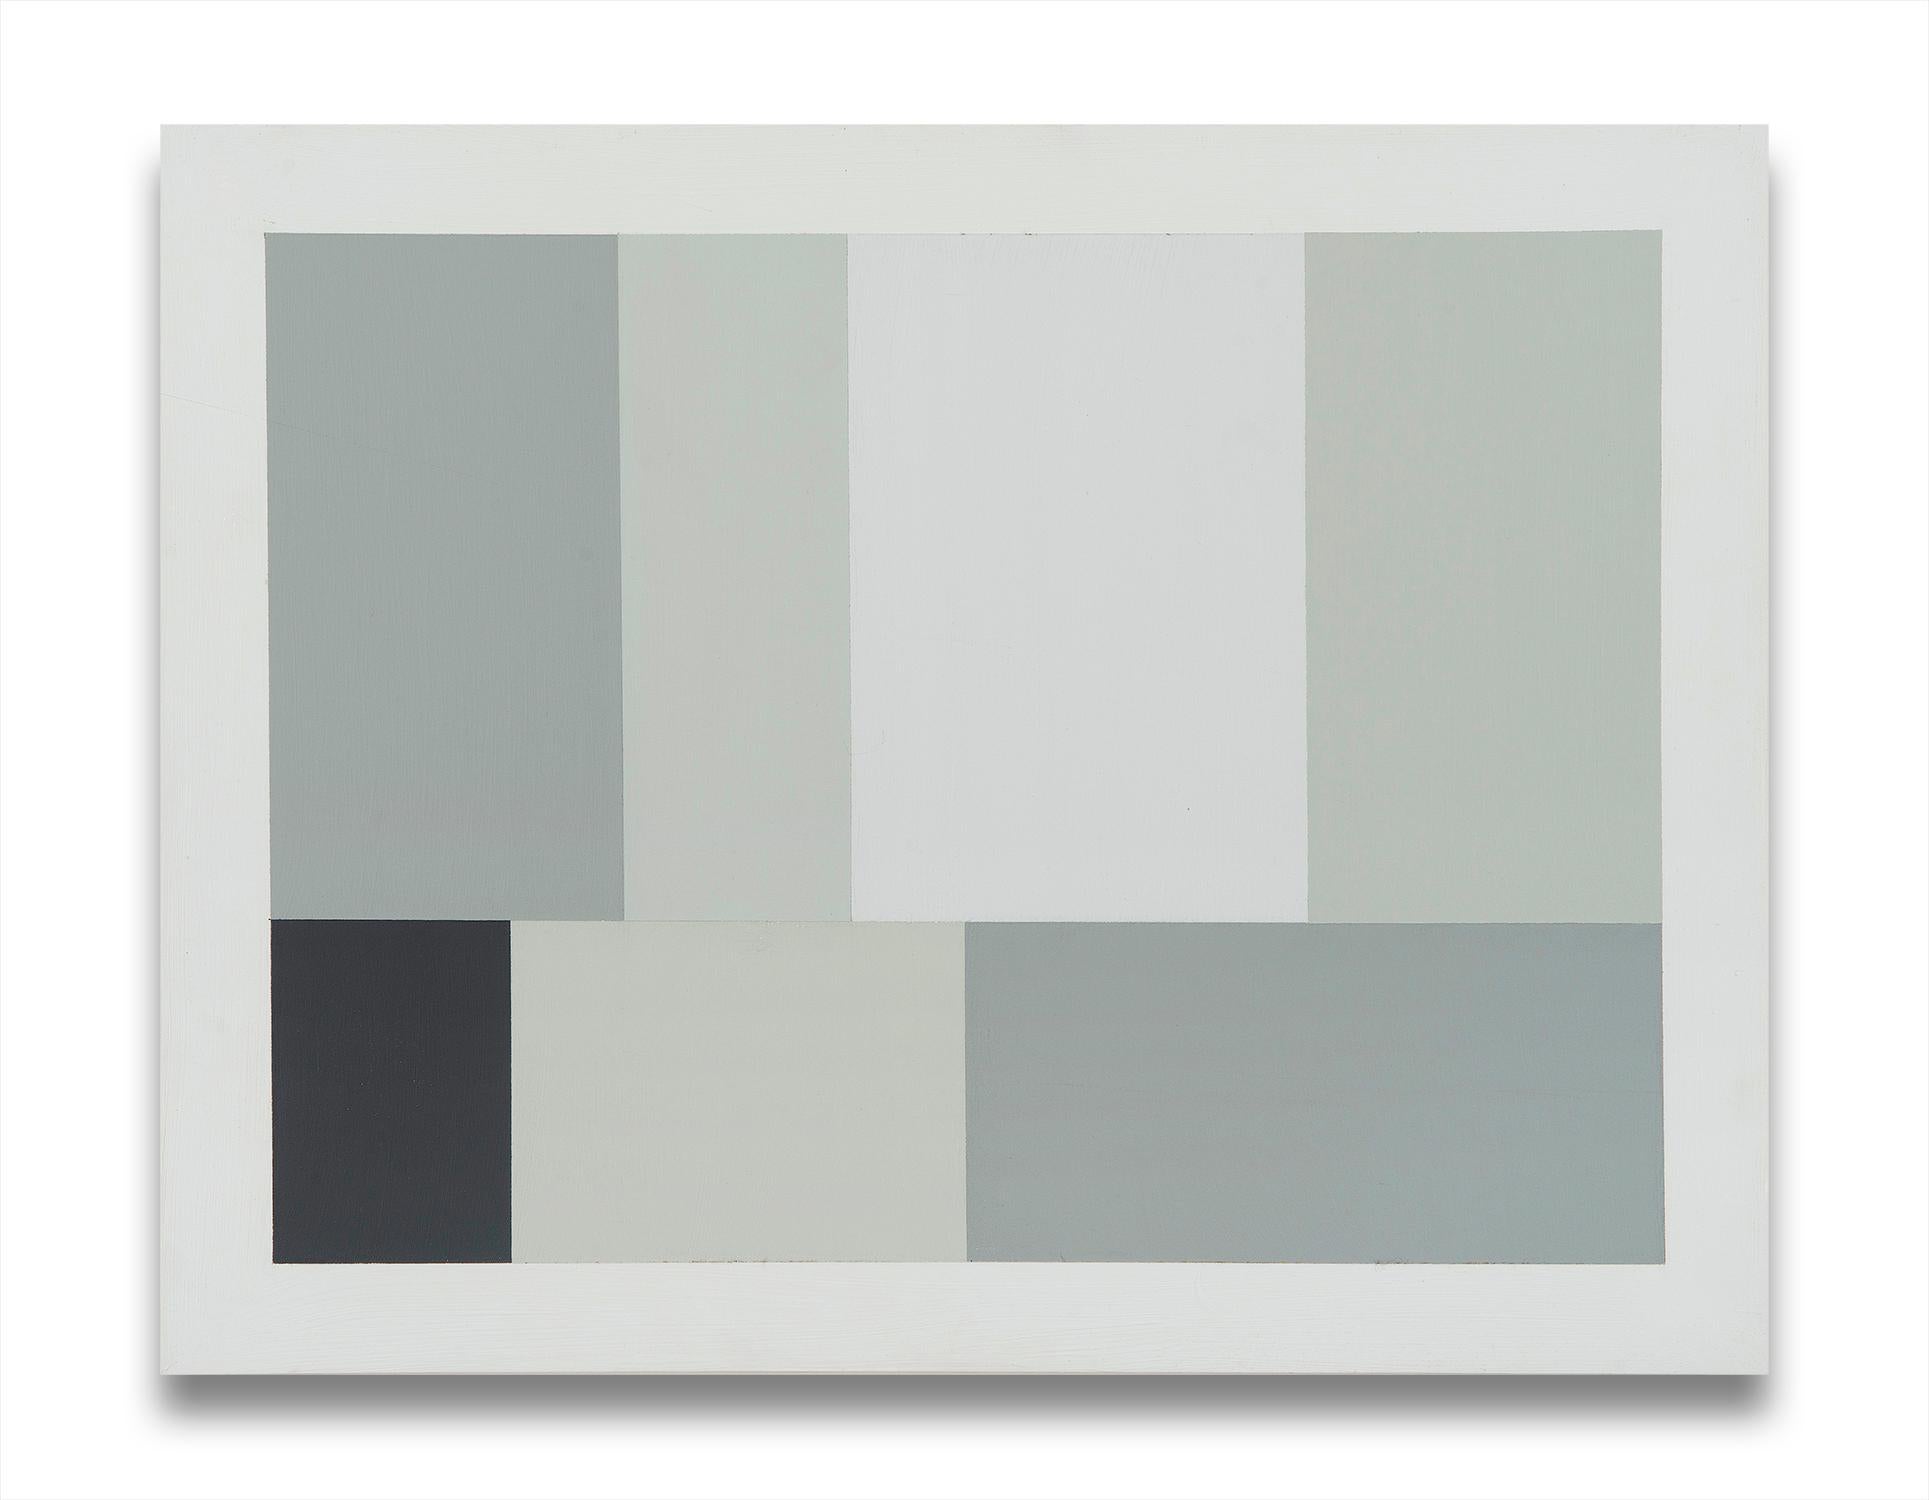 Small Grey Test Pattern 2 (Abstract Painting)

Acrylic/gouache on wood - Unframed

Test Pattern series sets up a generic template as a poetic prompt to consider how behavioural responses to color and form stimulate an abstract sense of contemporary